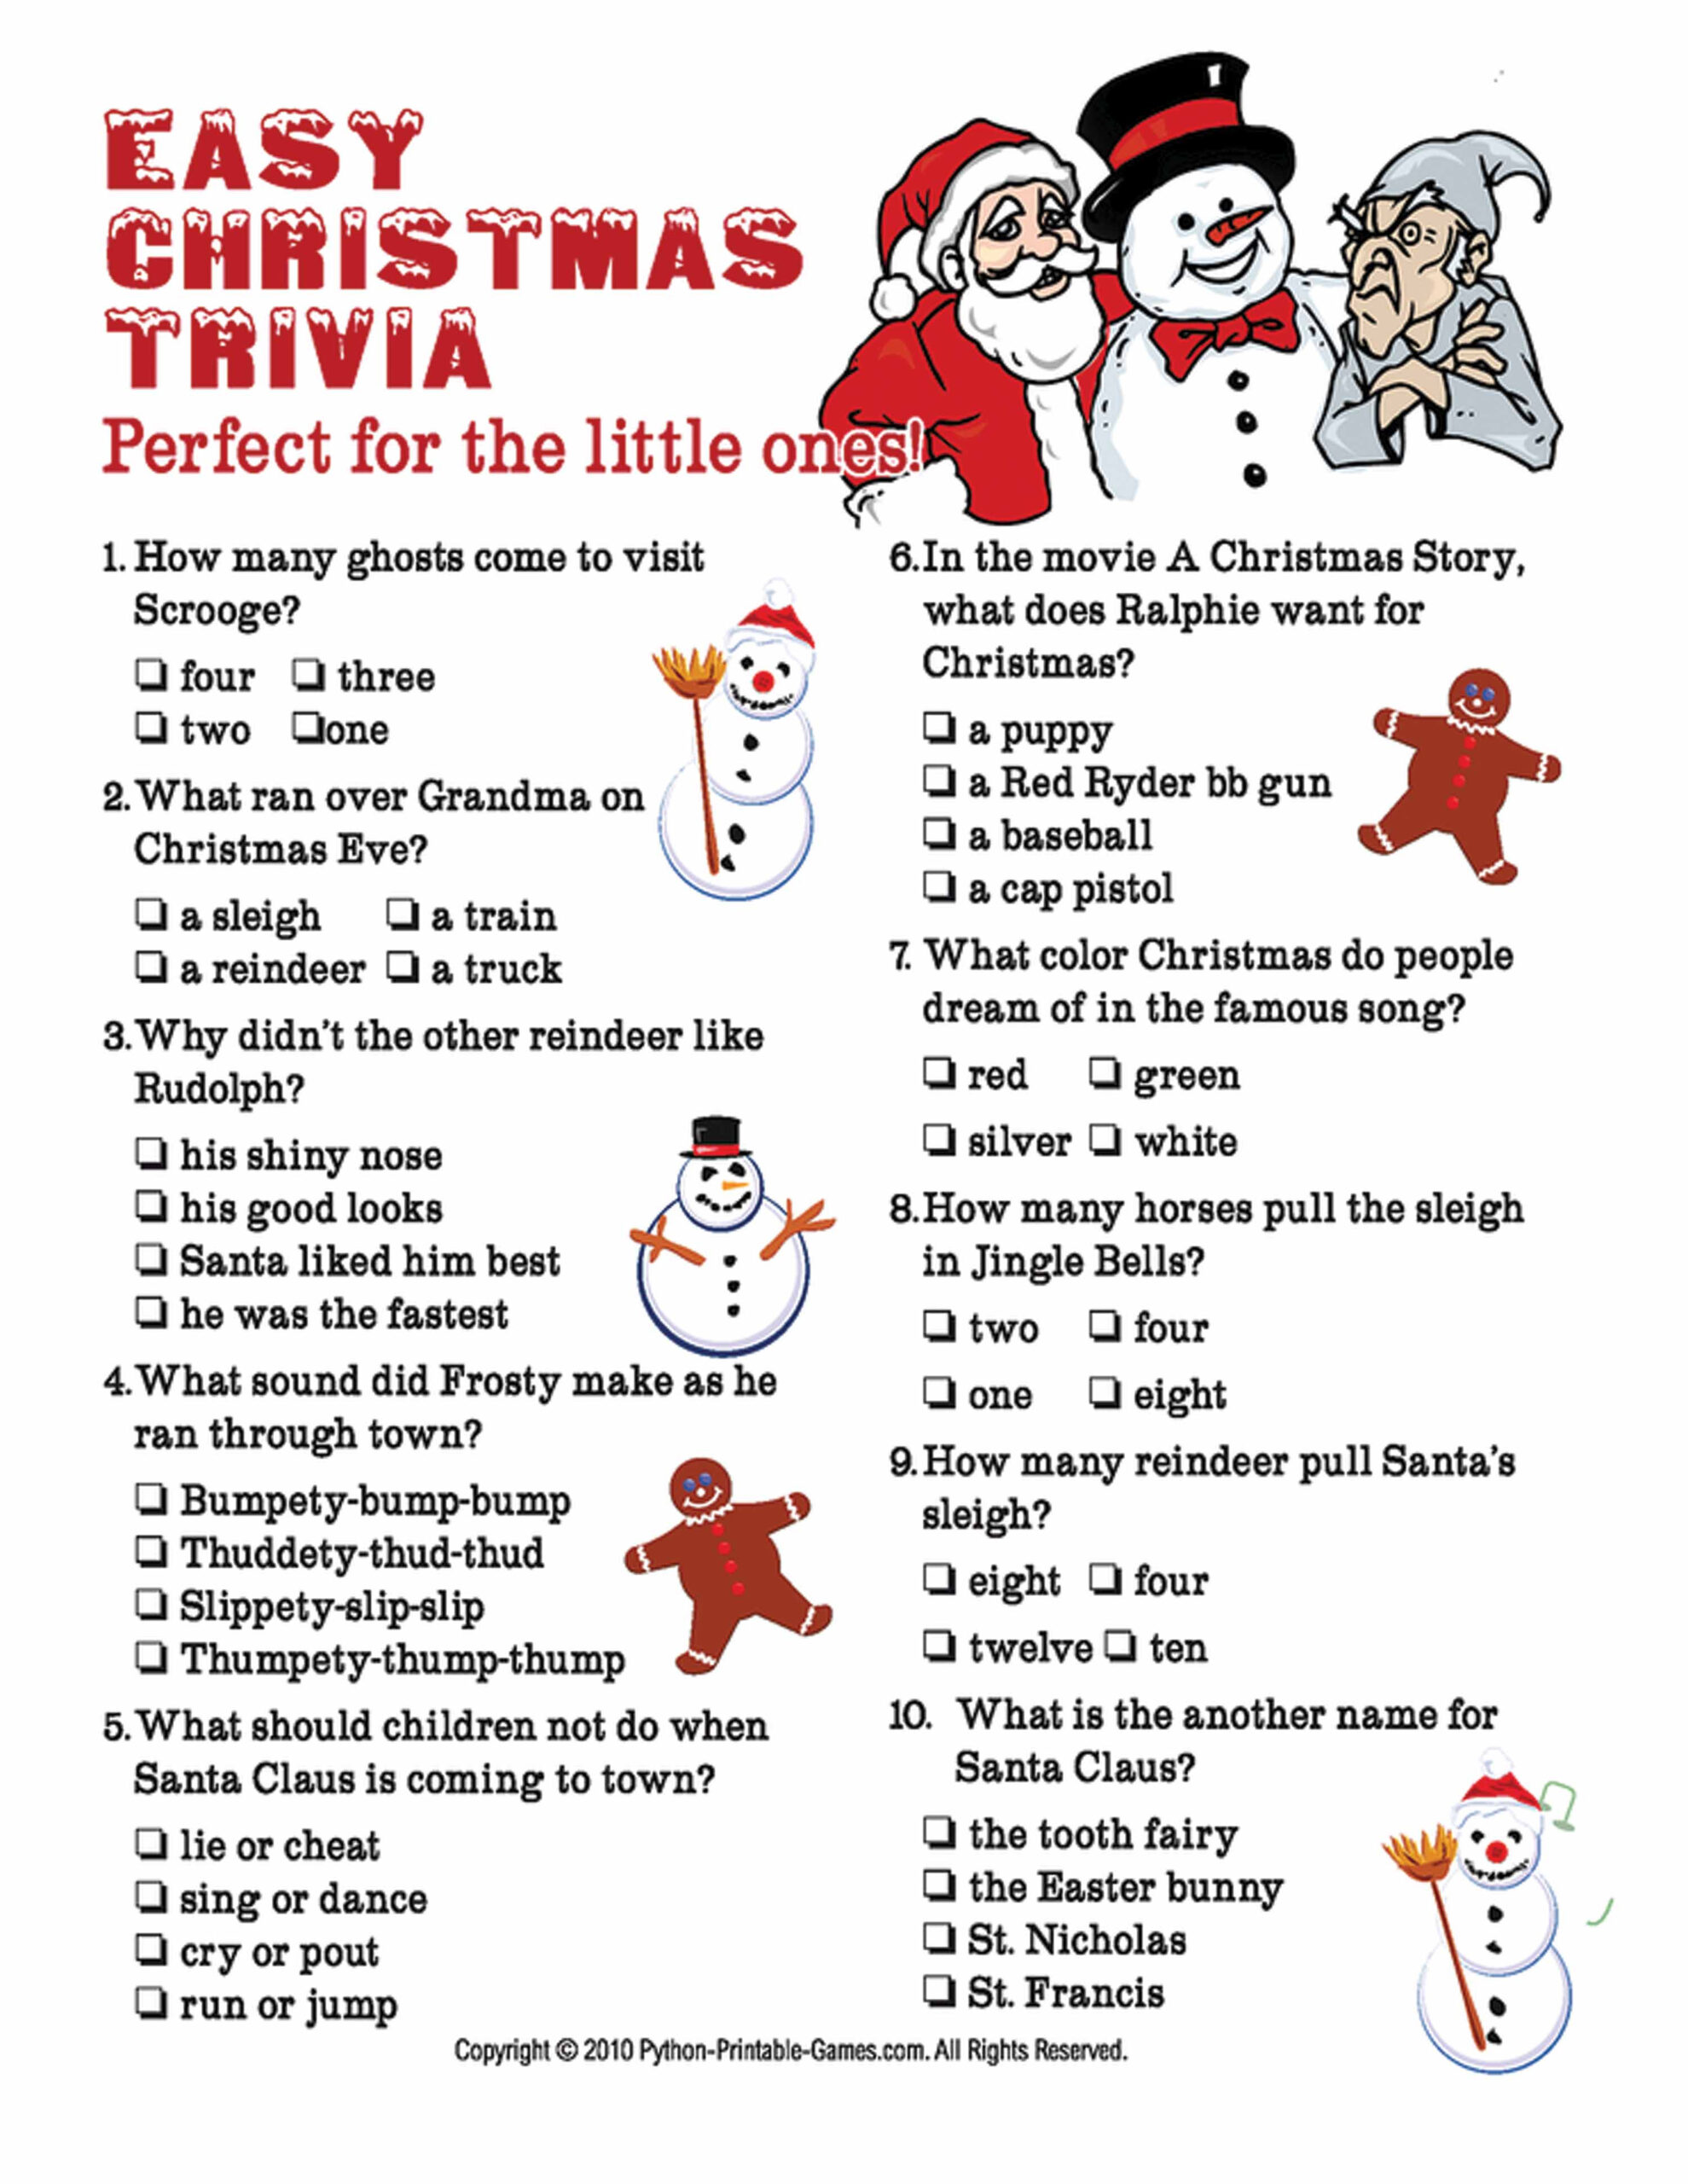 Trivia Questions About Christmas